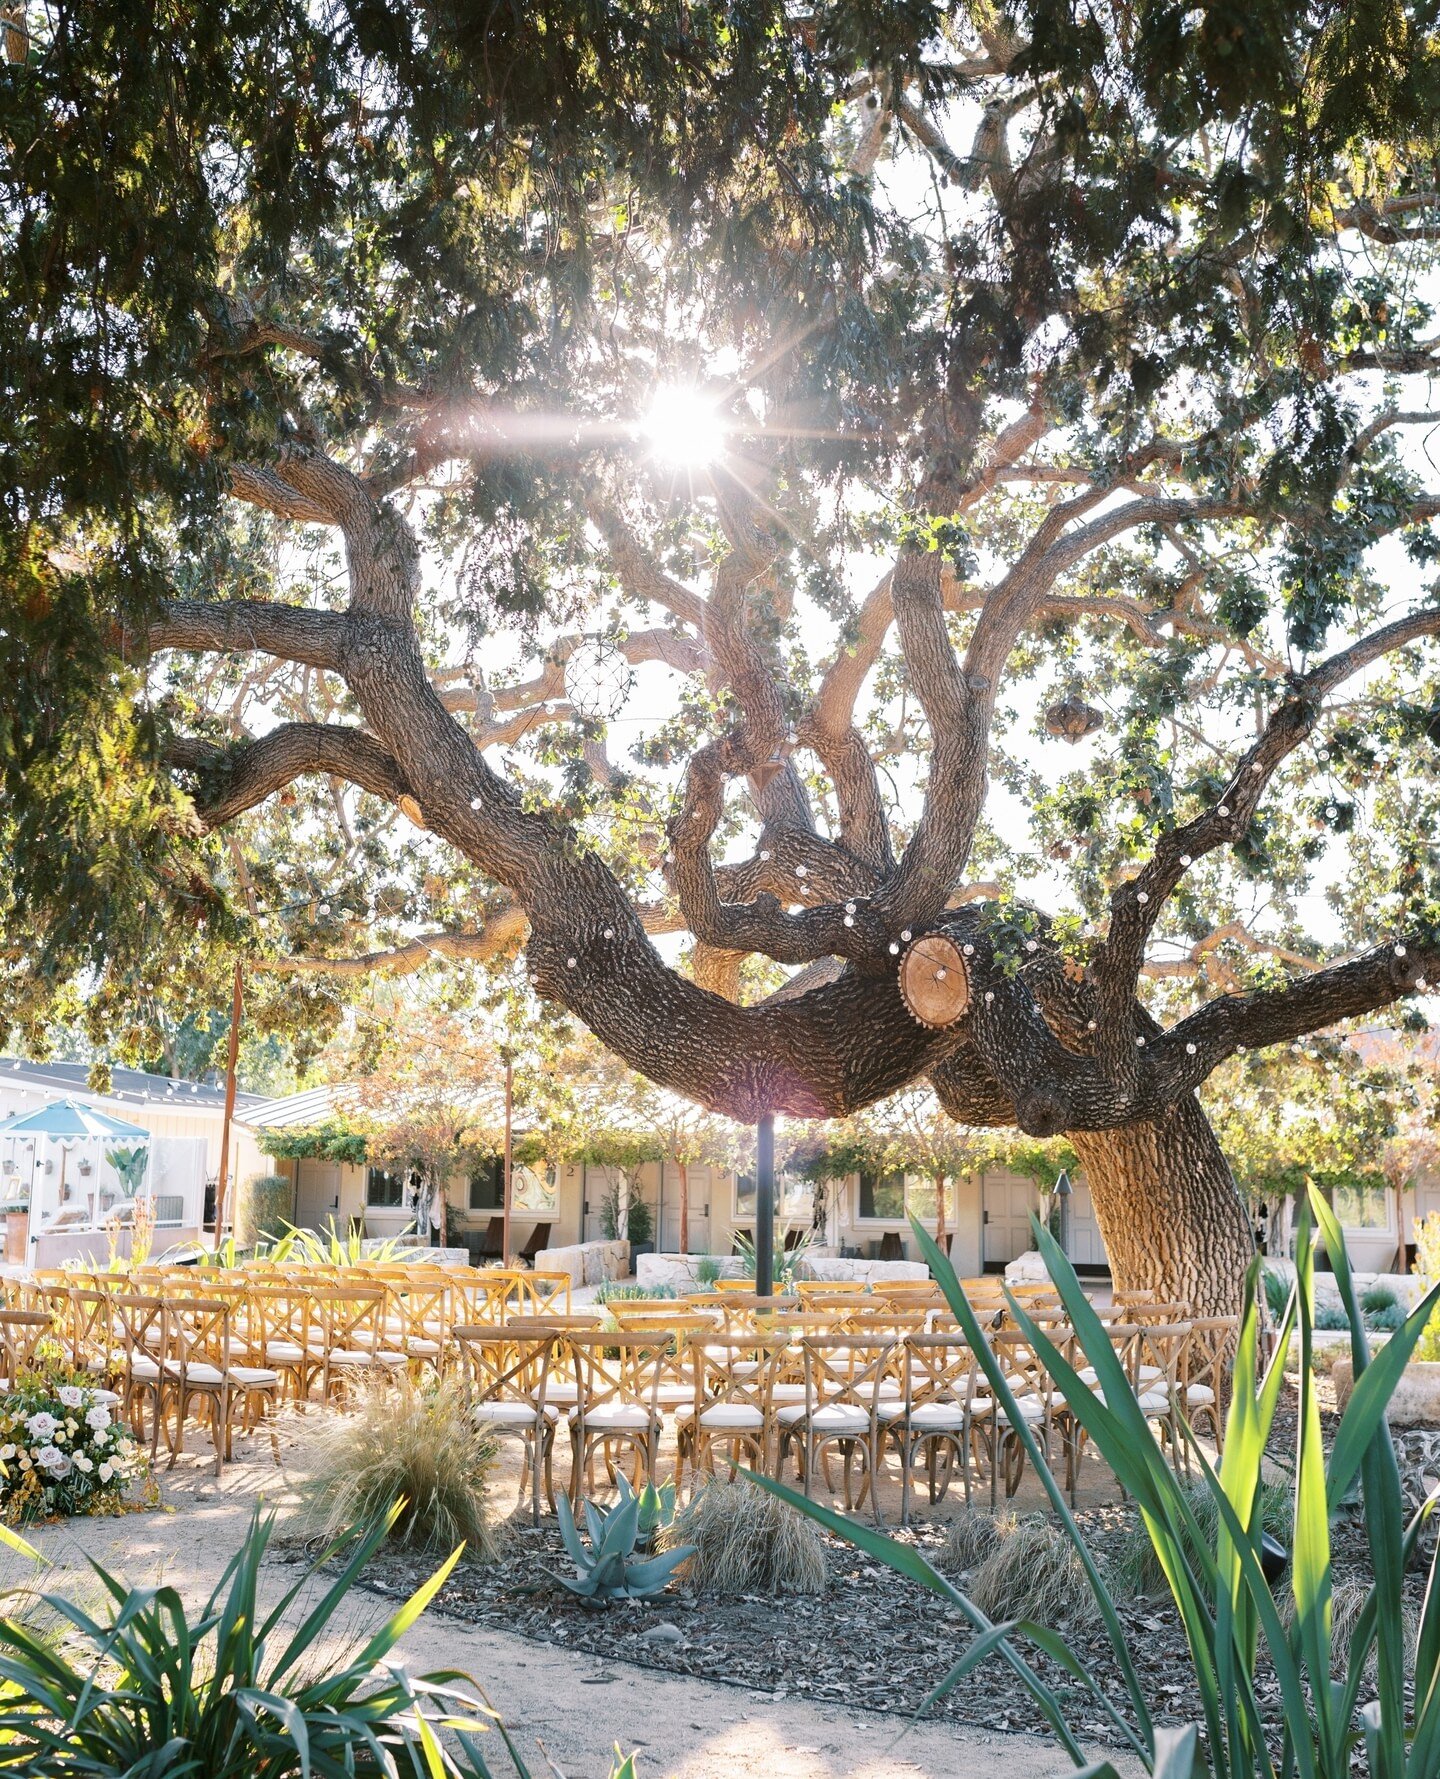 Fit for a fairytale ✨ Contact our events team to make your dream wedding a reality - link in bio. ⁠
⁠
.⁠
.⁠
.⁠
⁠
Photo: @wisteriaphotography